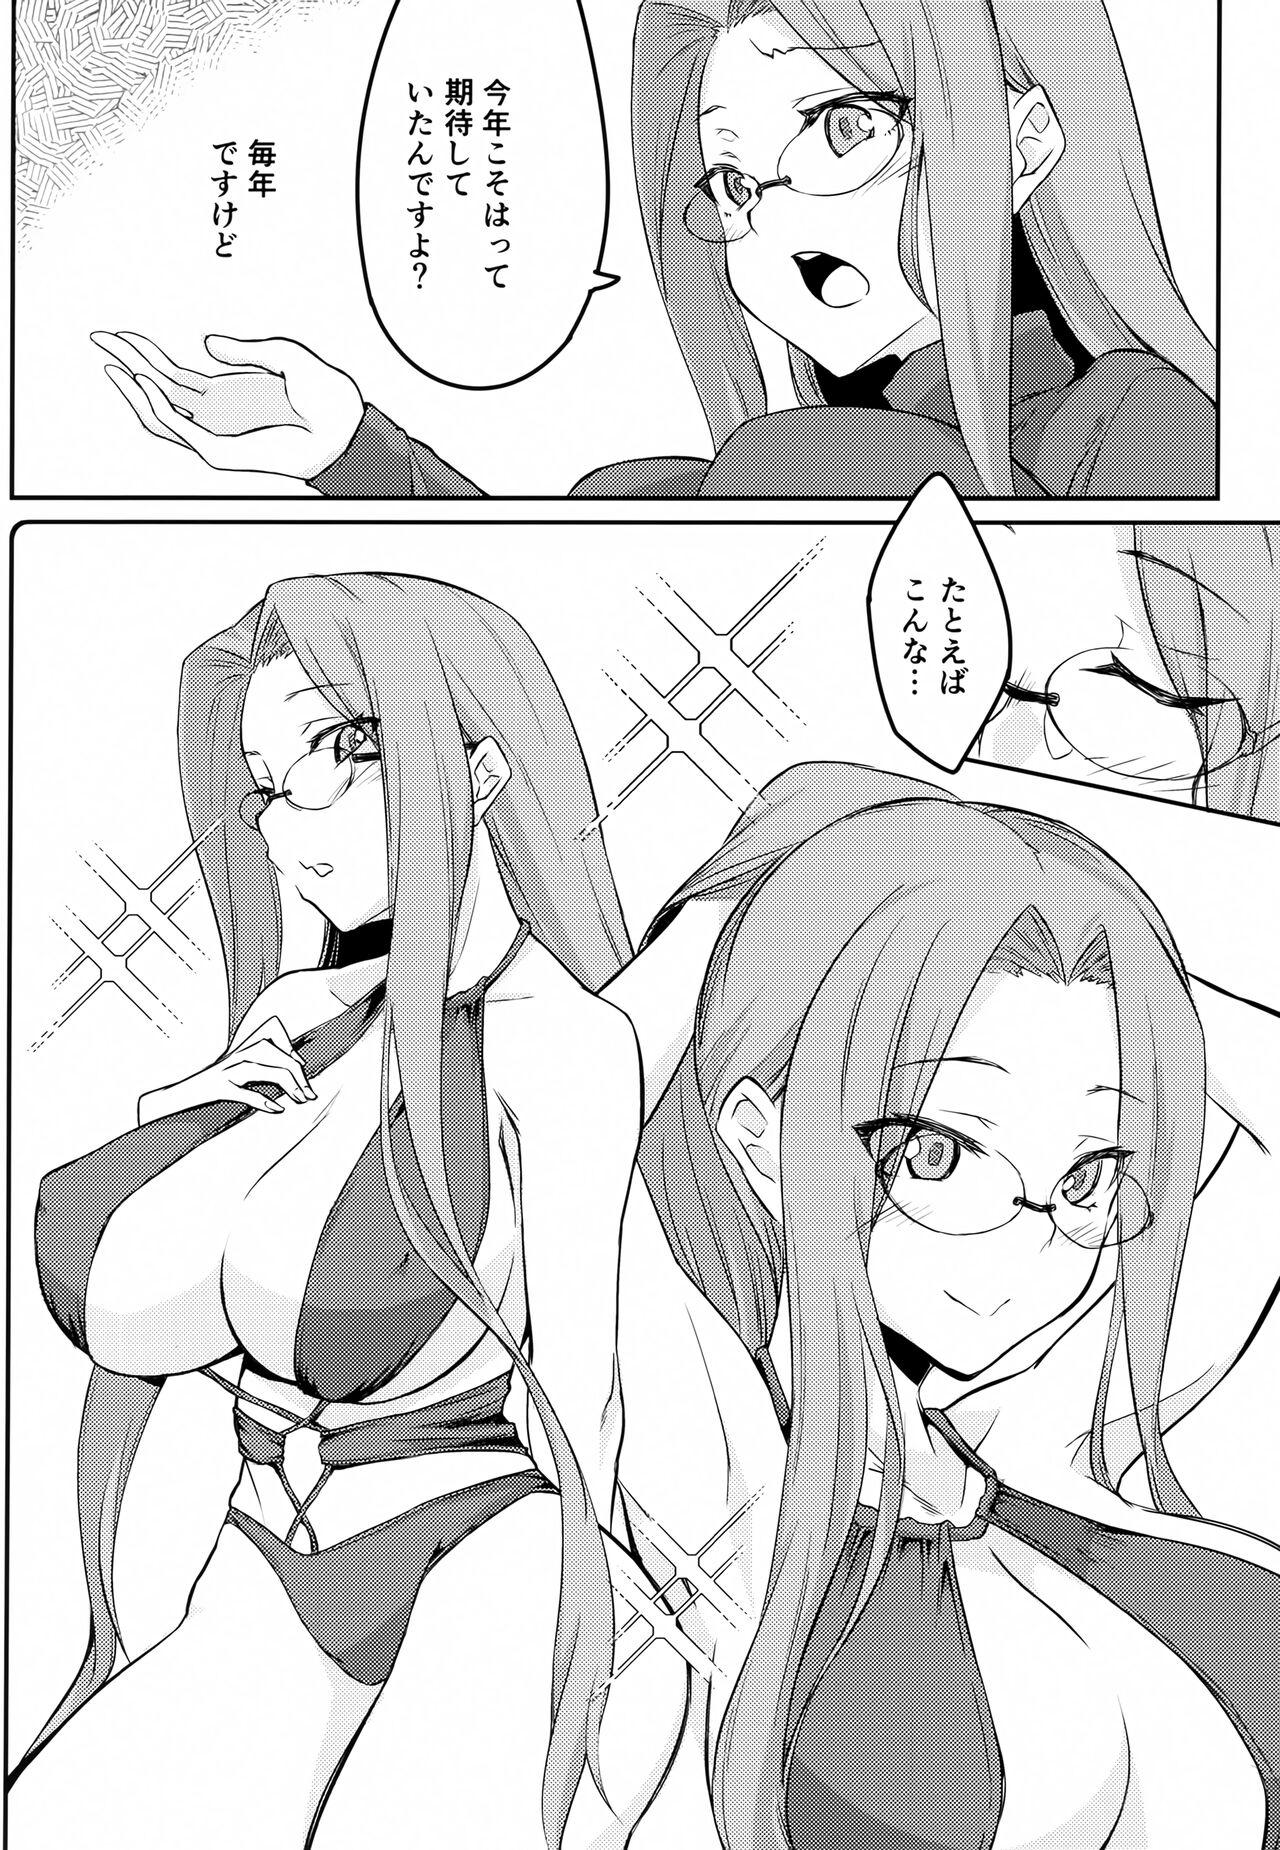 Daddy R15 - Fate stay night Lesbian Sex - Page 5